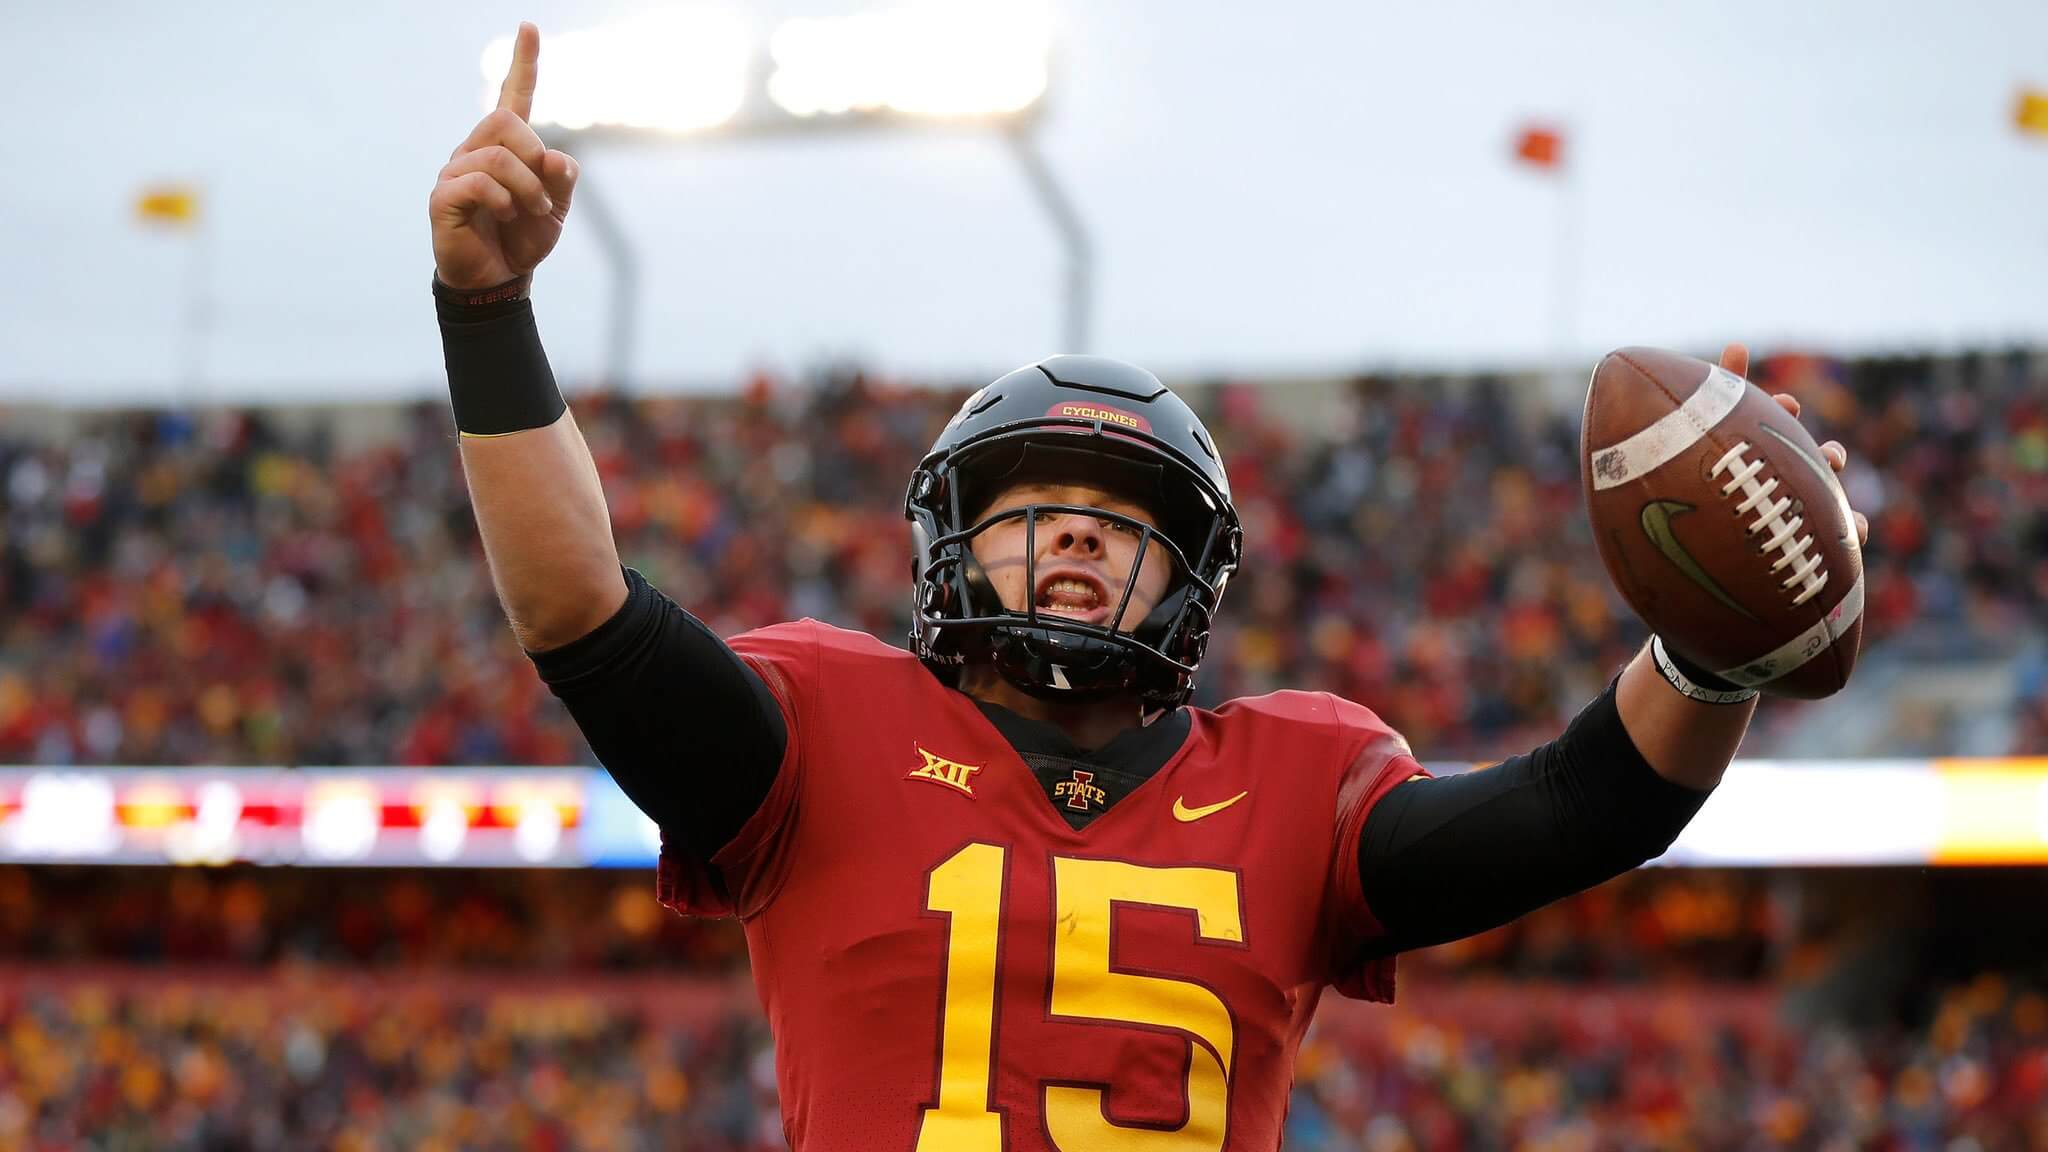 Iowa State Has Best Odds to Challenge Oklahoma, Texas for Big 12 Conference Title